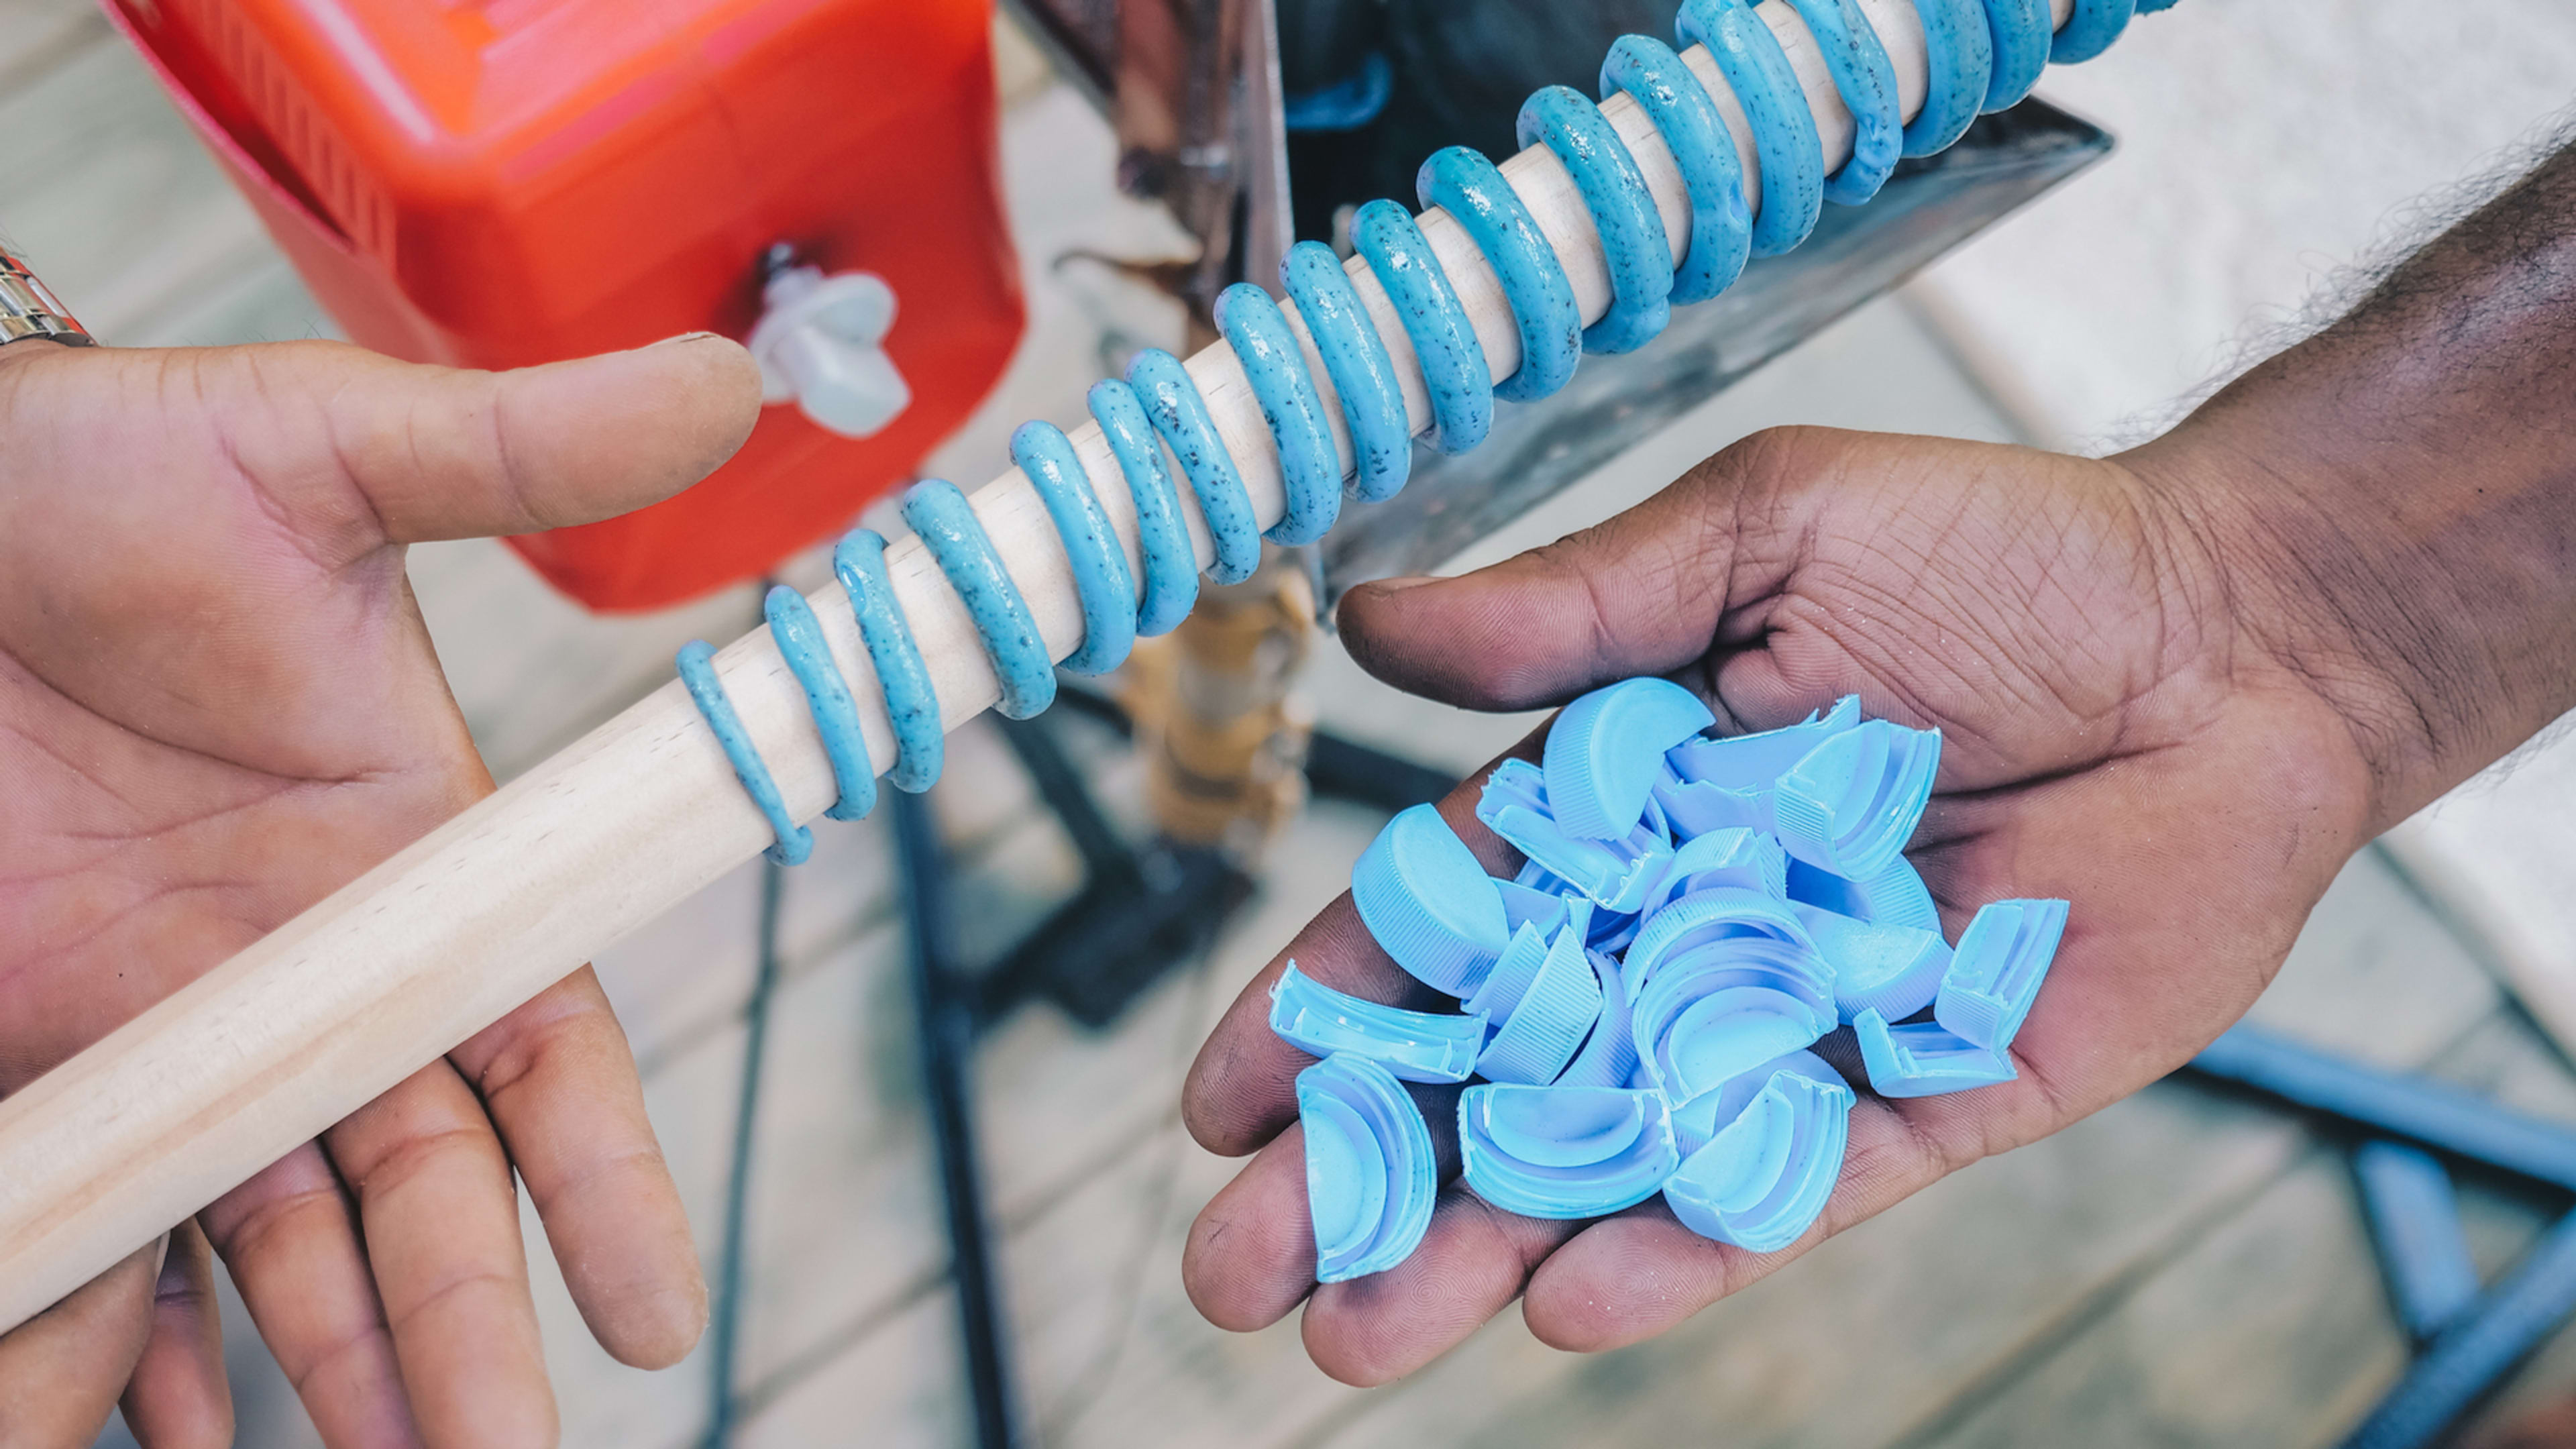 This hotel just launched a maker program to fight plastic pollution in the Maldives